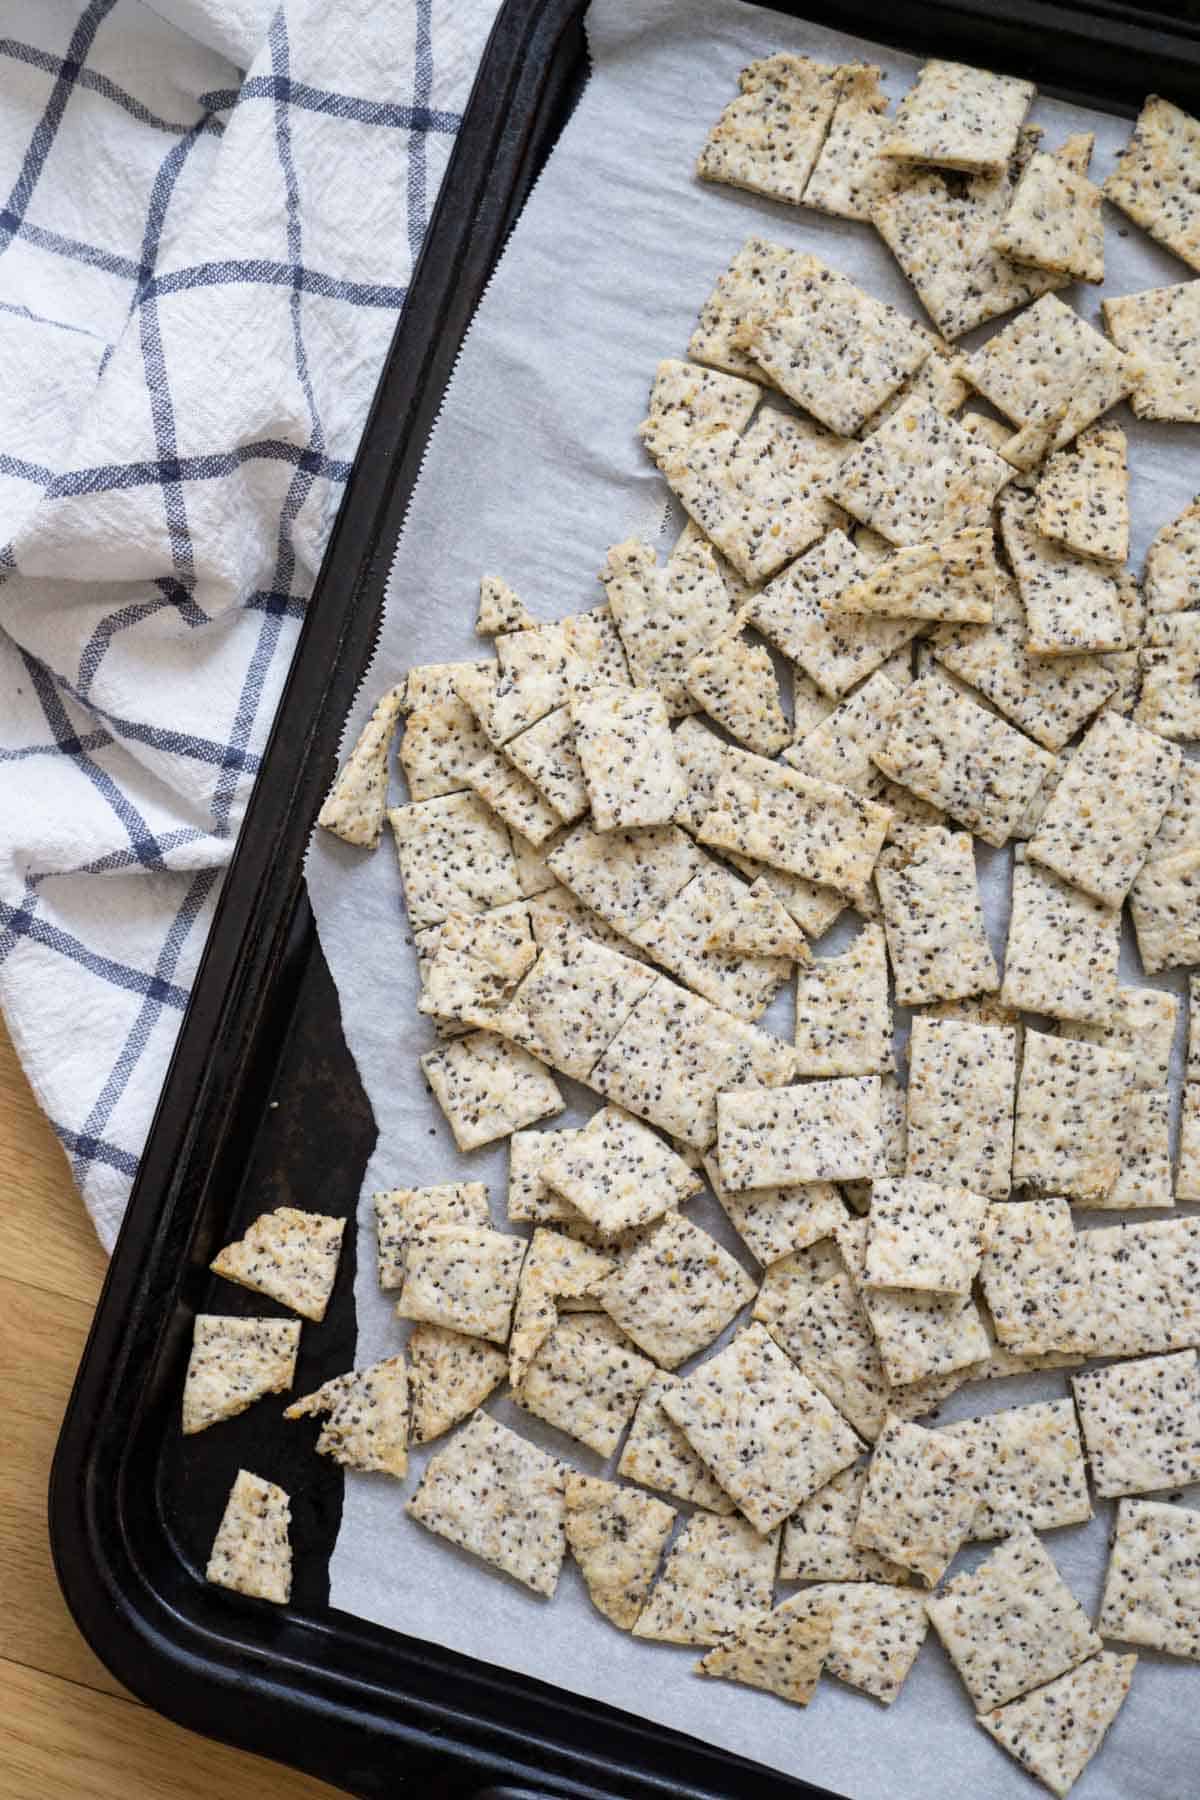 Baking sheet filled with homemade sourdough crackers with flax and chia seeds